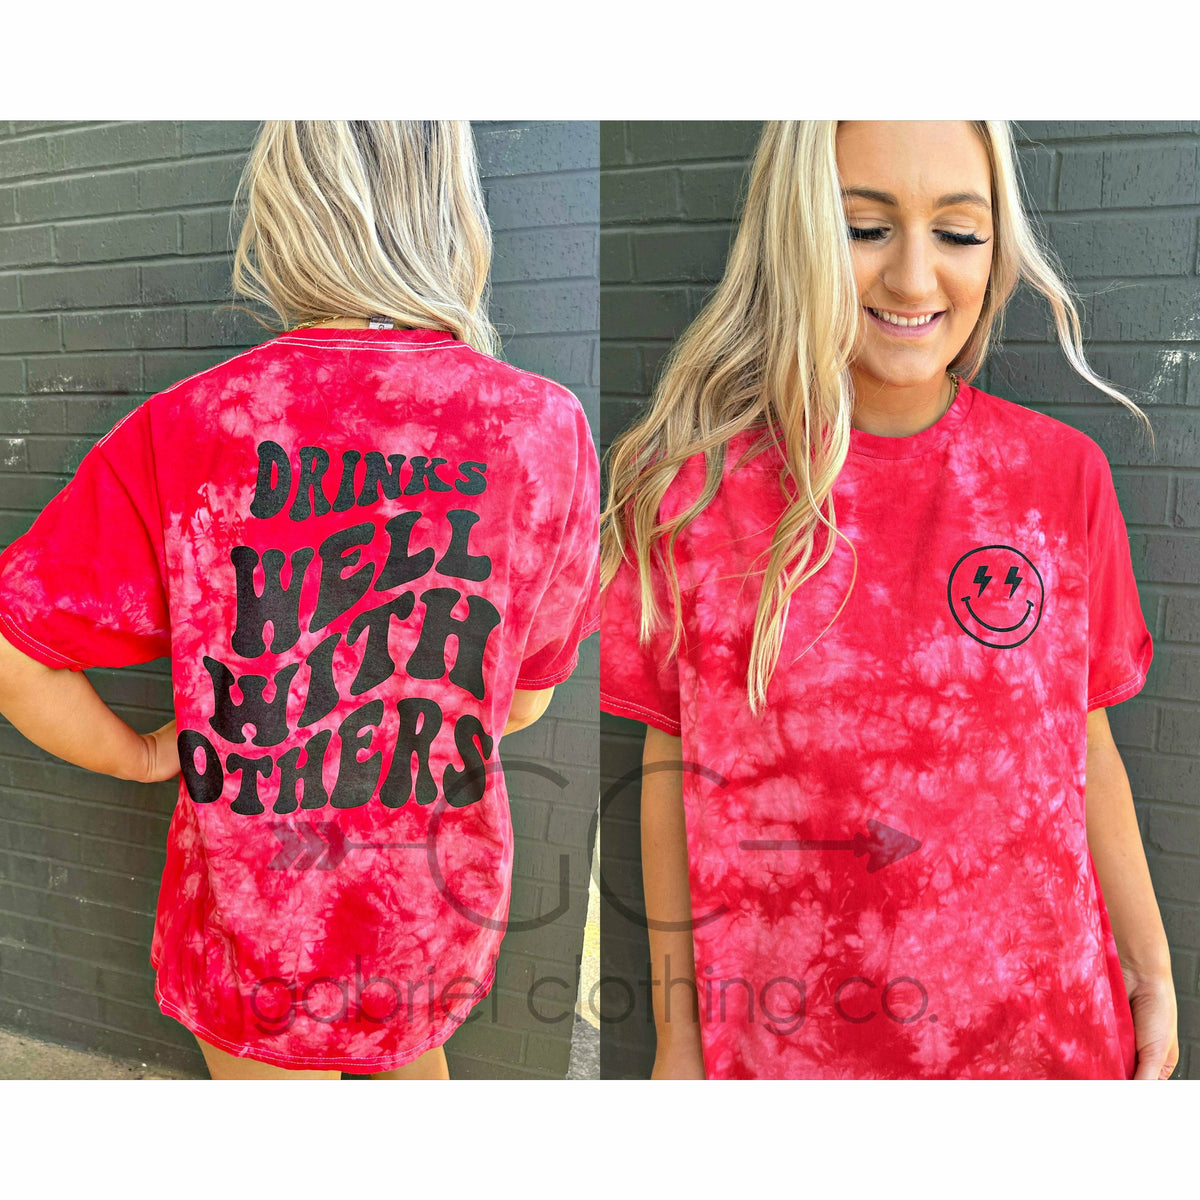 Drinks well with others Red Tie Dye tee